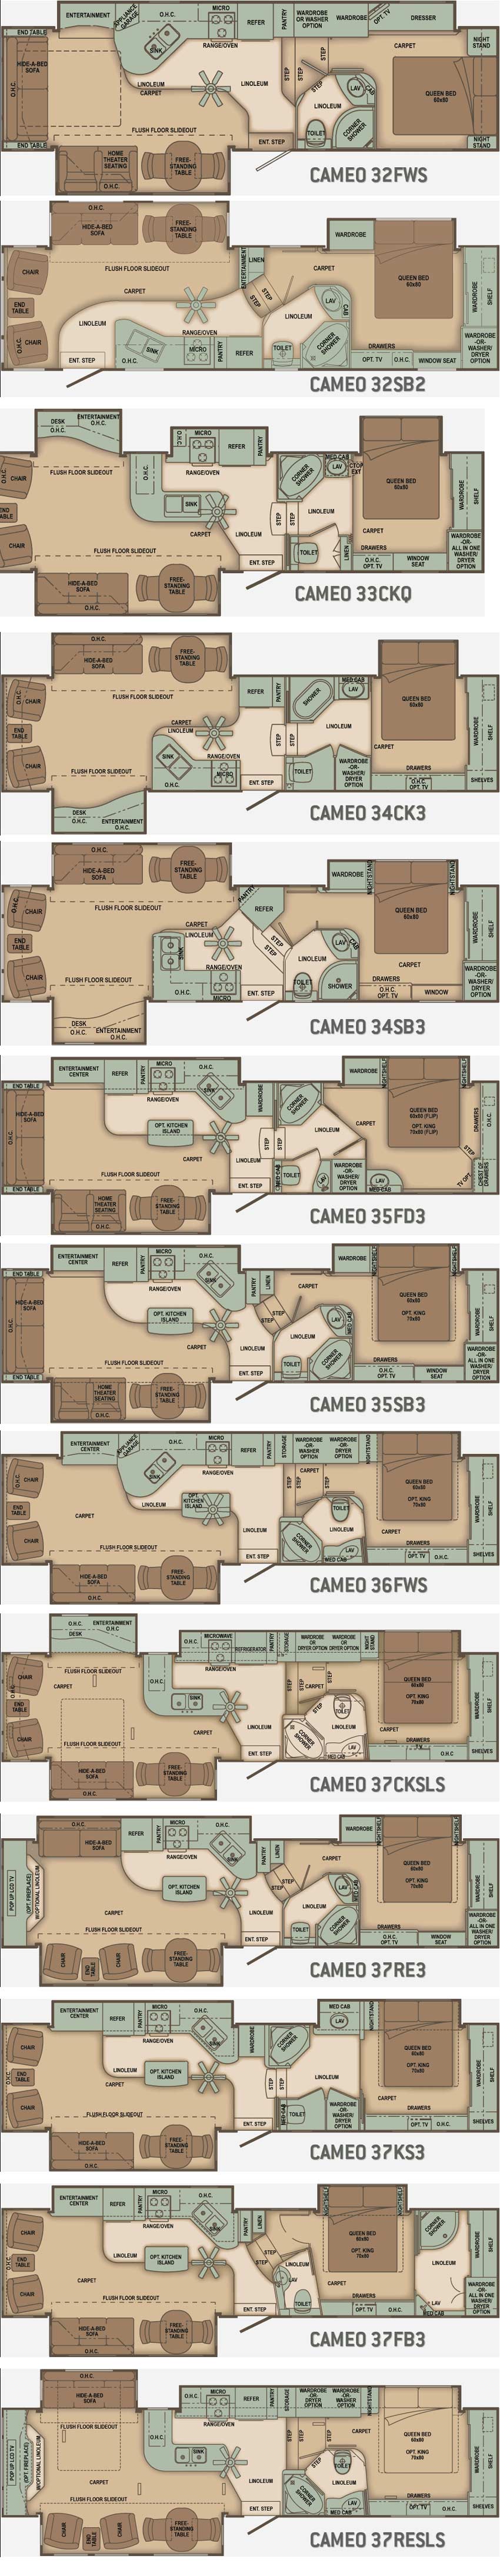 Carriage Cameo fifth wheel floorplans large picture